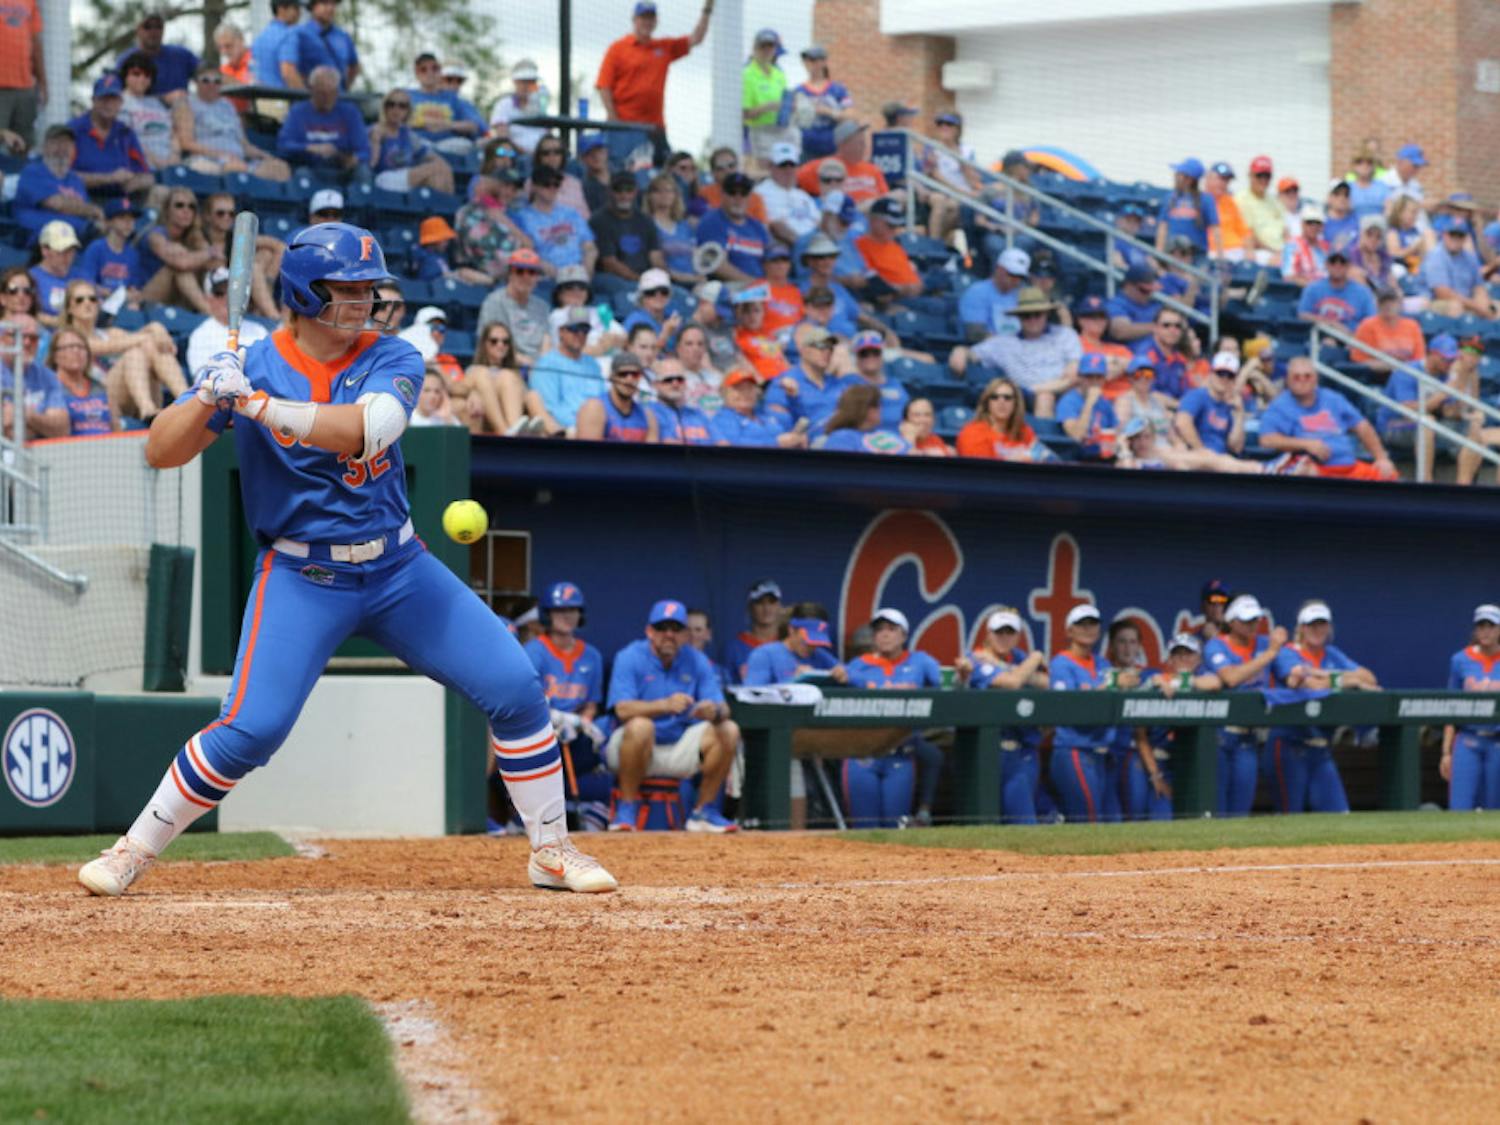 Catcher Kendyl Lindaman hit a grand slam to give the Gators the 4-1 lead in the seventh inning. Florida topped Mississippi State 4-3 on Saturday.